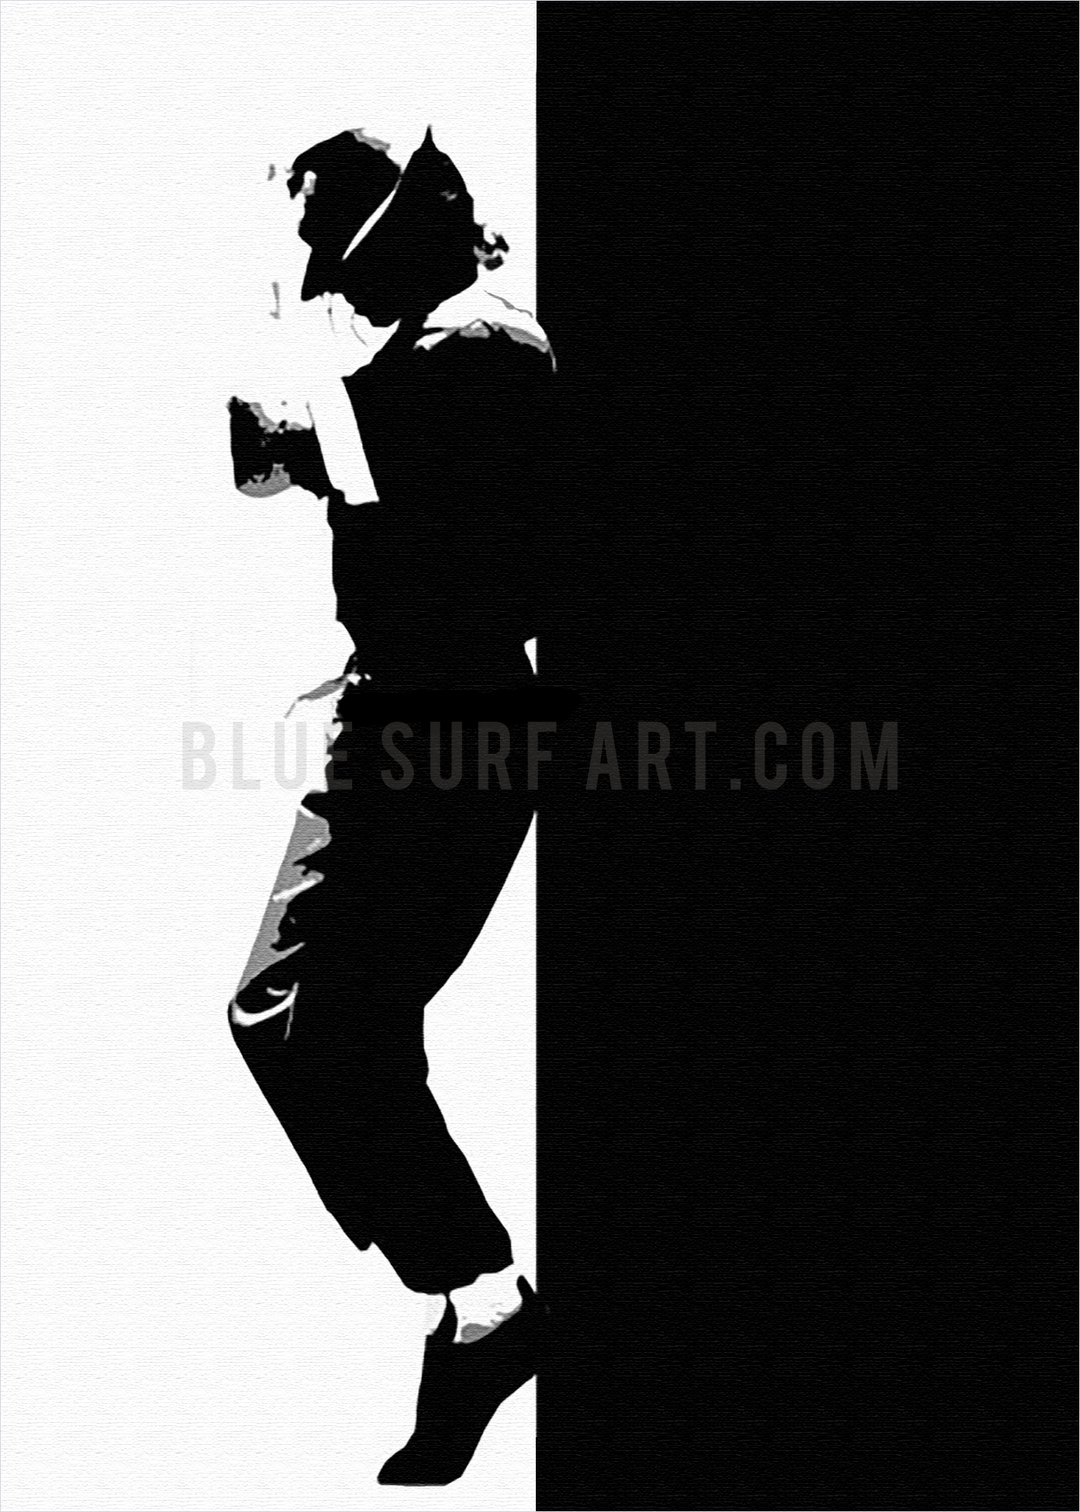 Off the Wall - Michael Jackson Oil Painting on Canvas by Blue Surf Art